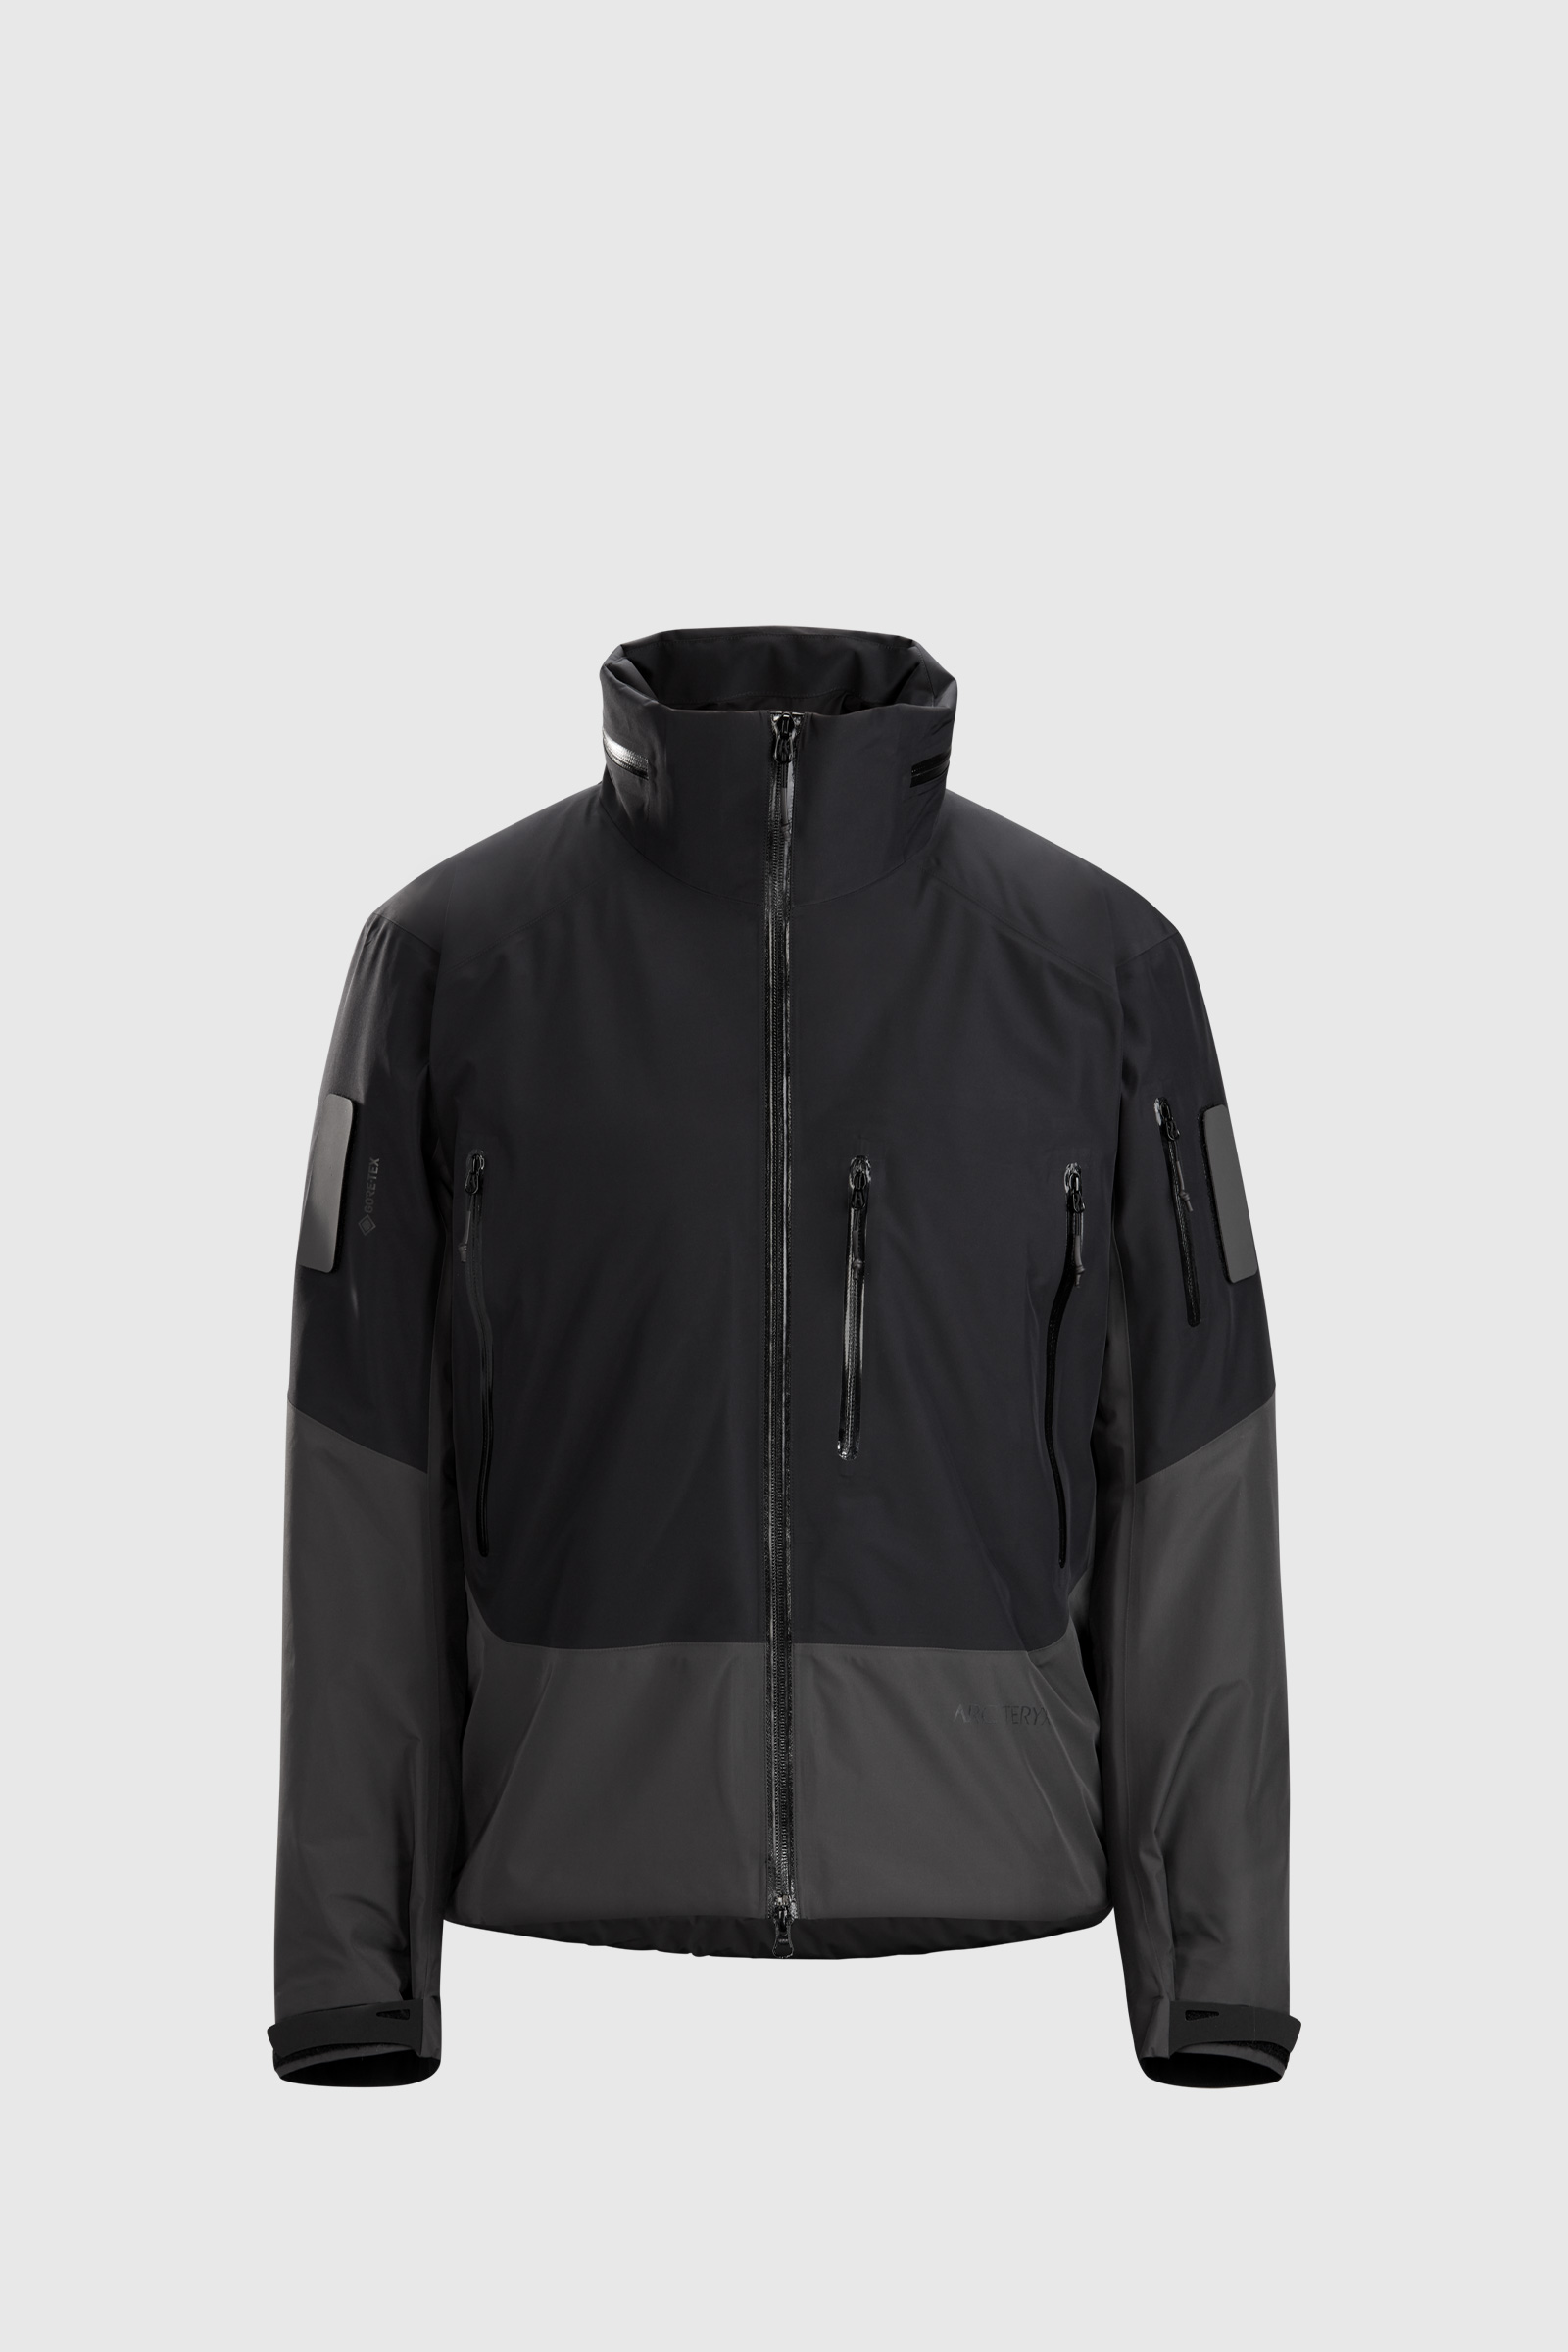 AXIS INSULATED Jacket System_A Arcteryx-